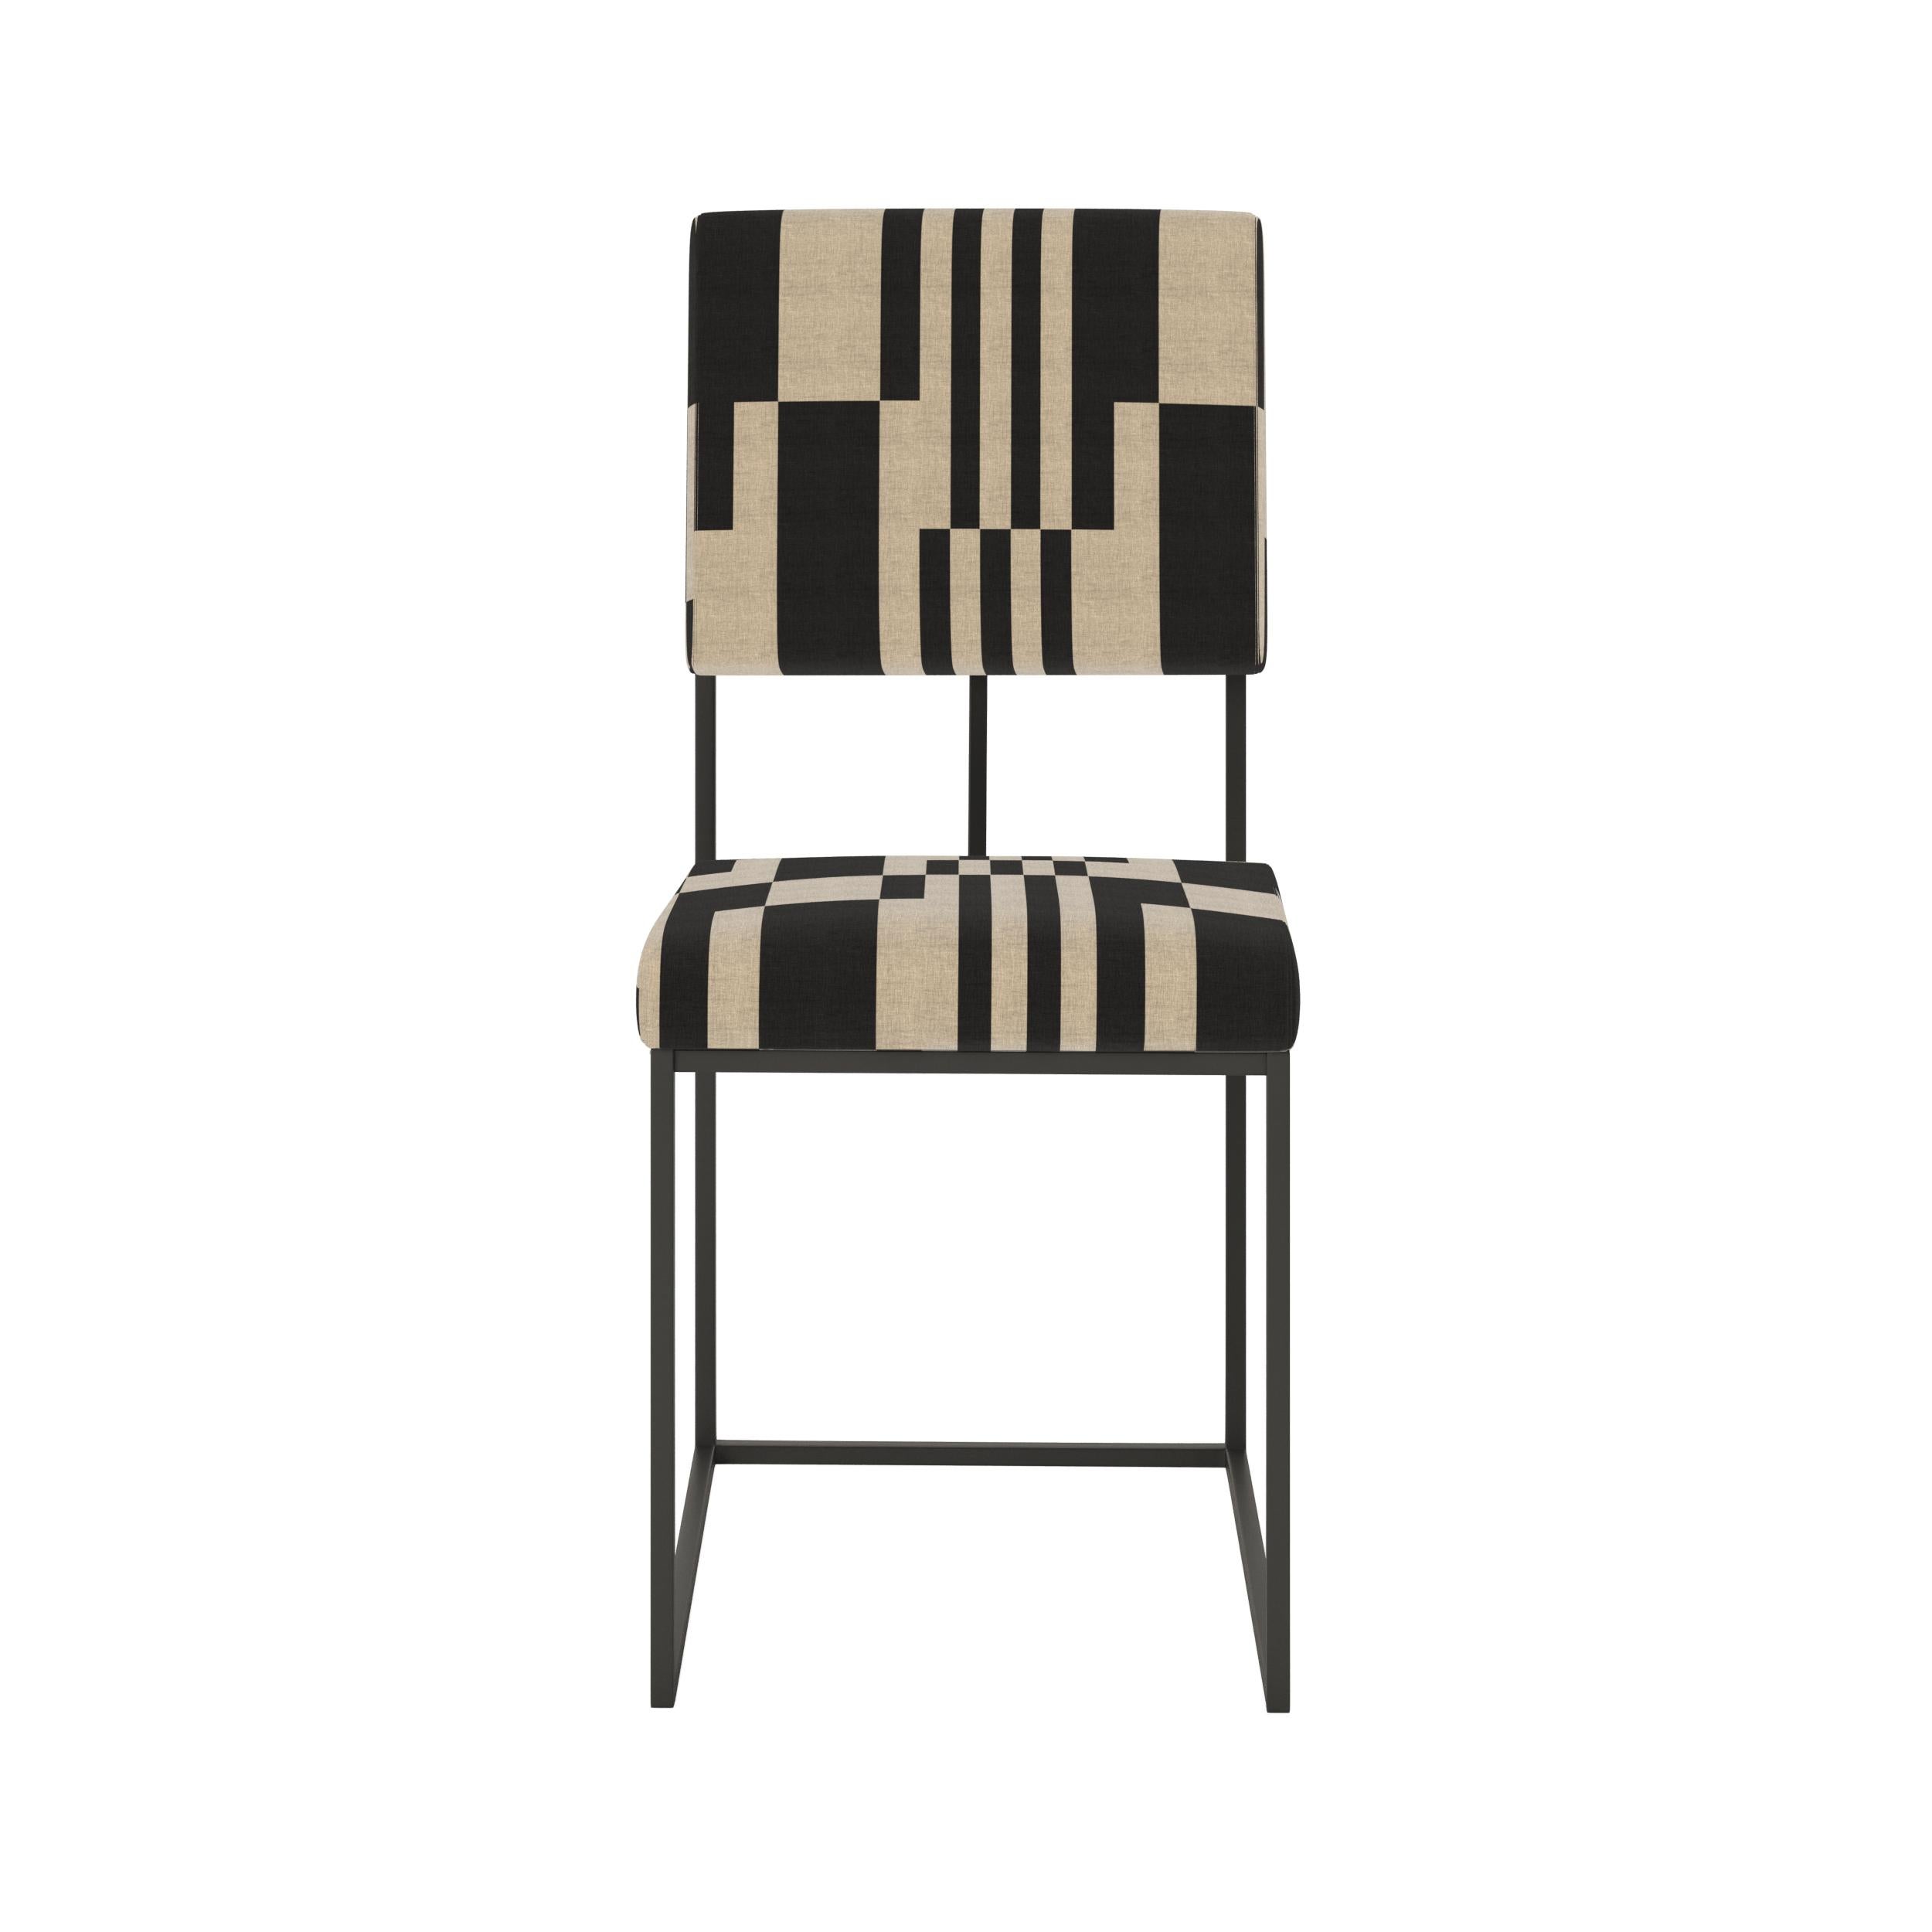 Inspired by minimalist design but engineered for maximum comfort. 
Sleek and practical, perfect for contemporary timeless interiors lovers. 
The fabric has a geometric design of lines in ecru / black color.
Structure: Black texturized steel.
COM